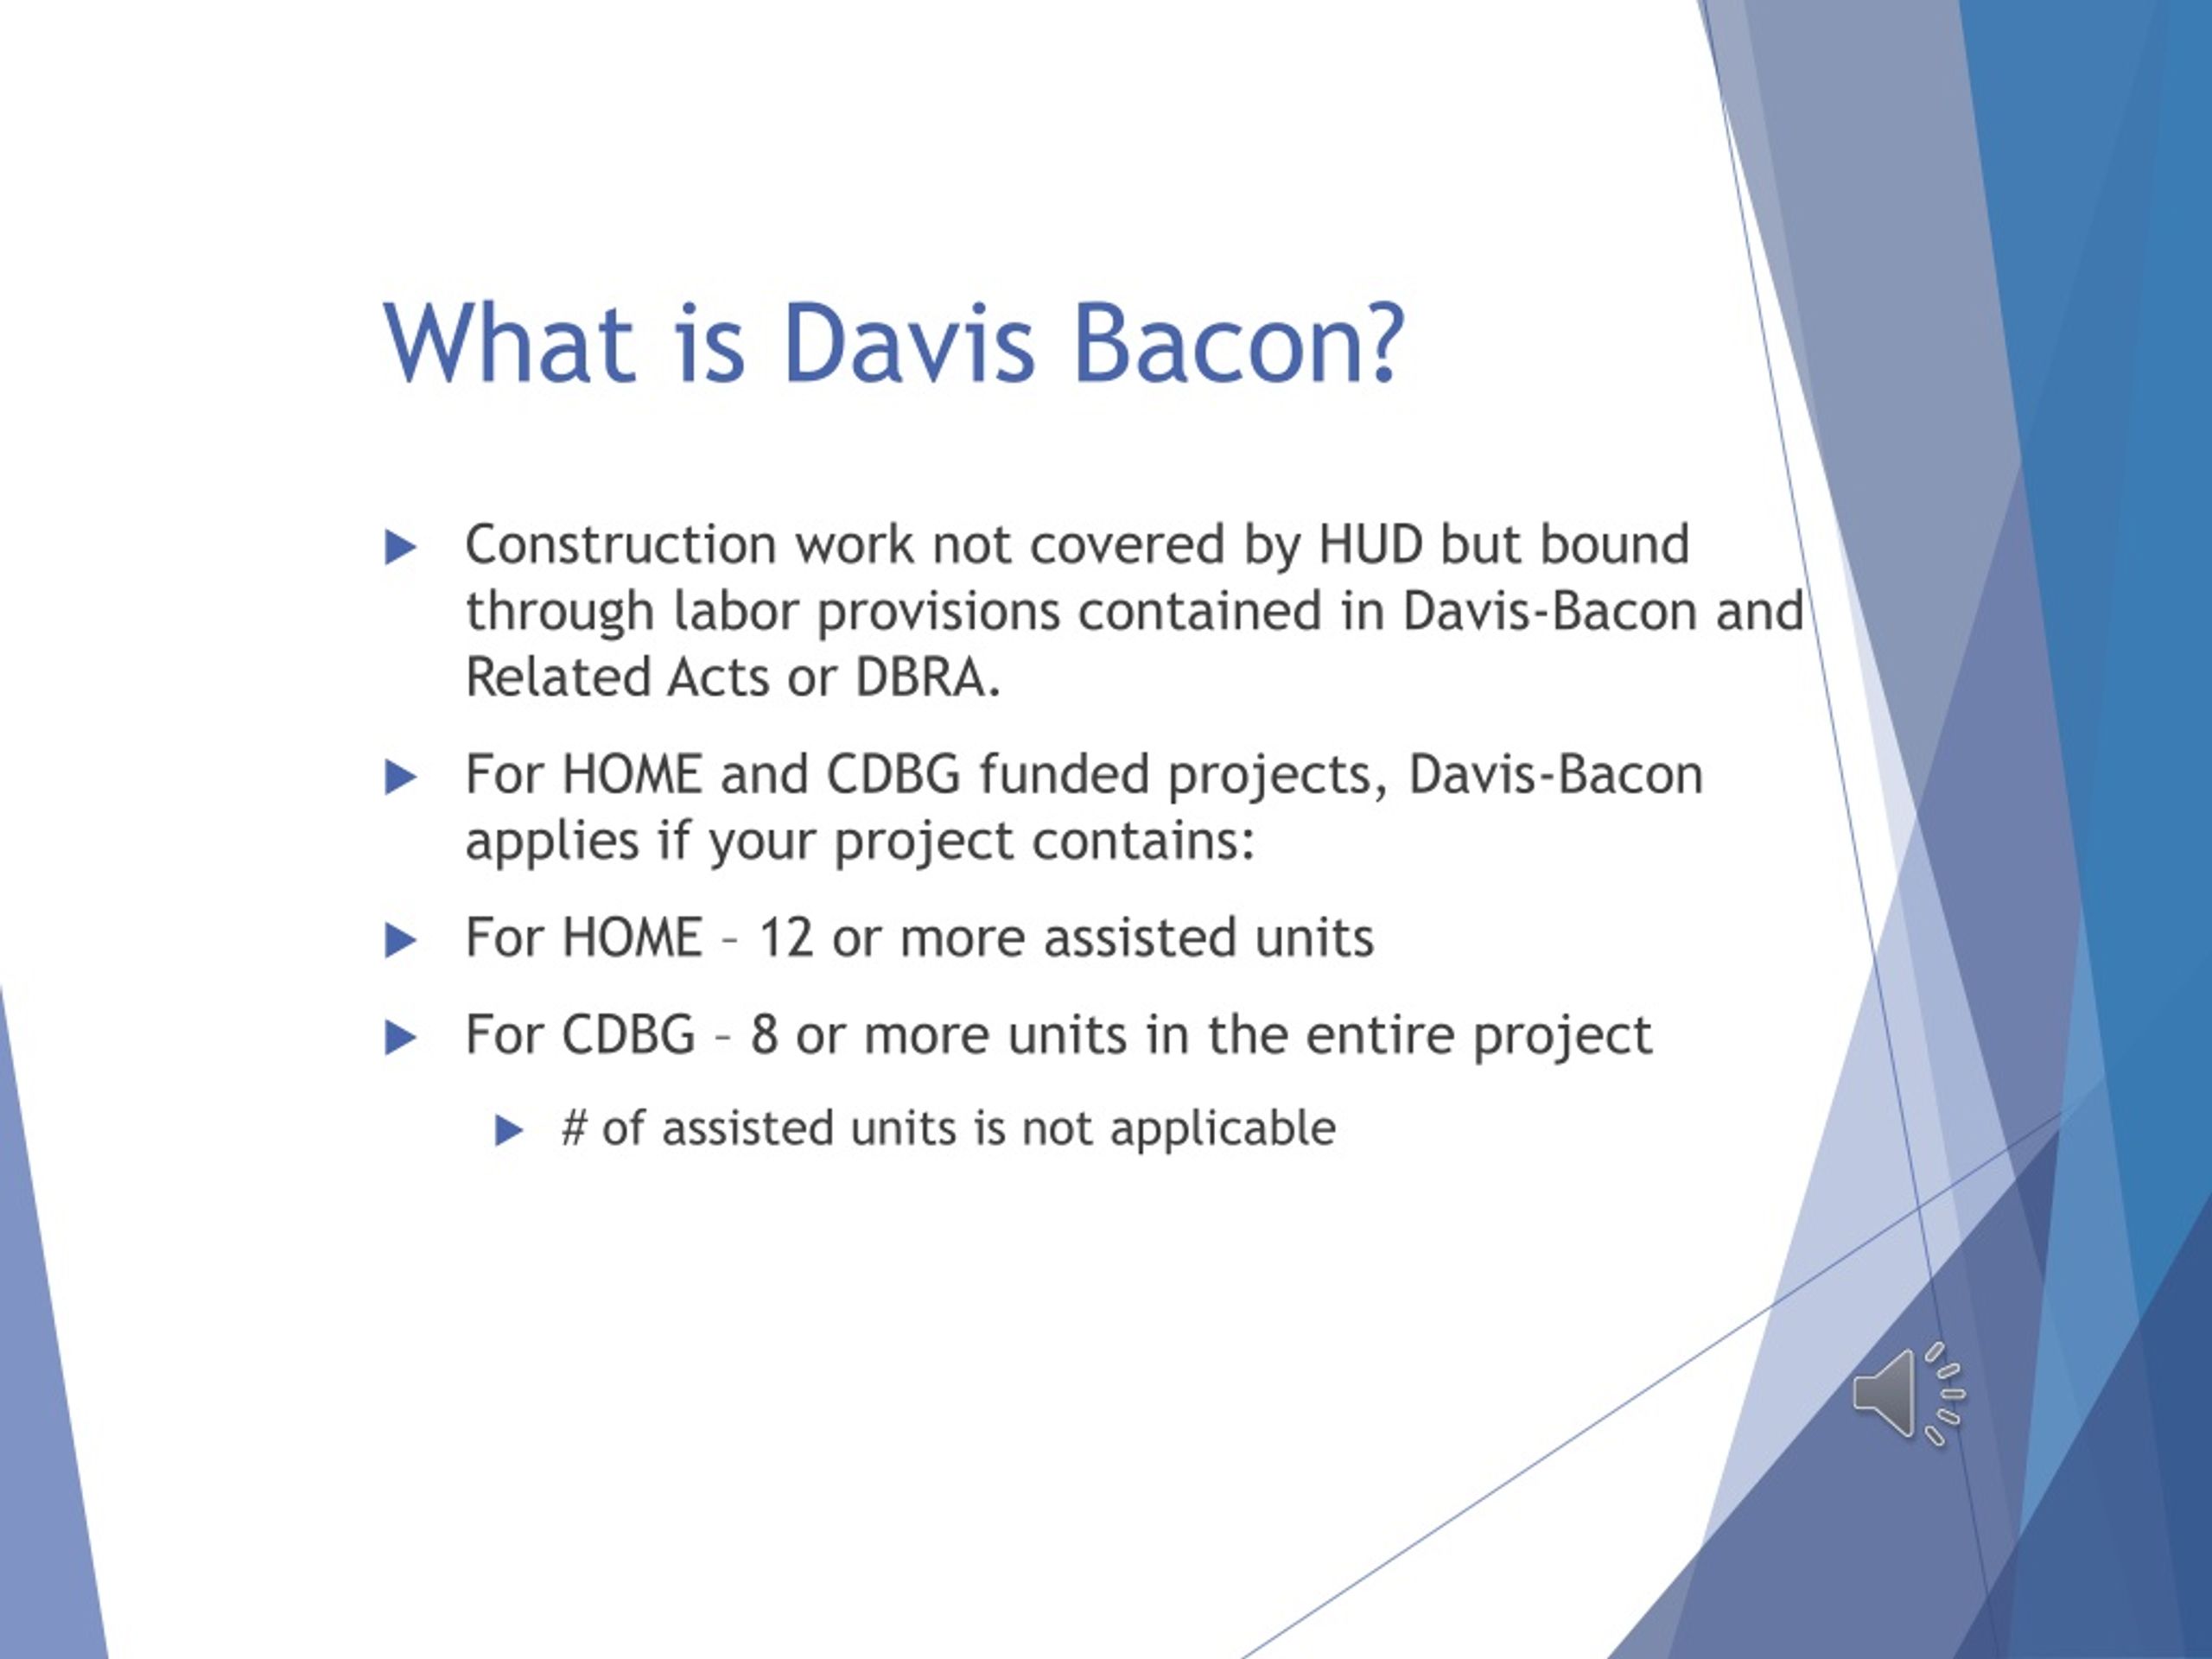 PPT Labor Standards Davis Bacon for Contractors PowerPoint Presentation ID9106888